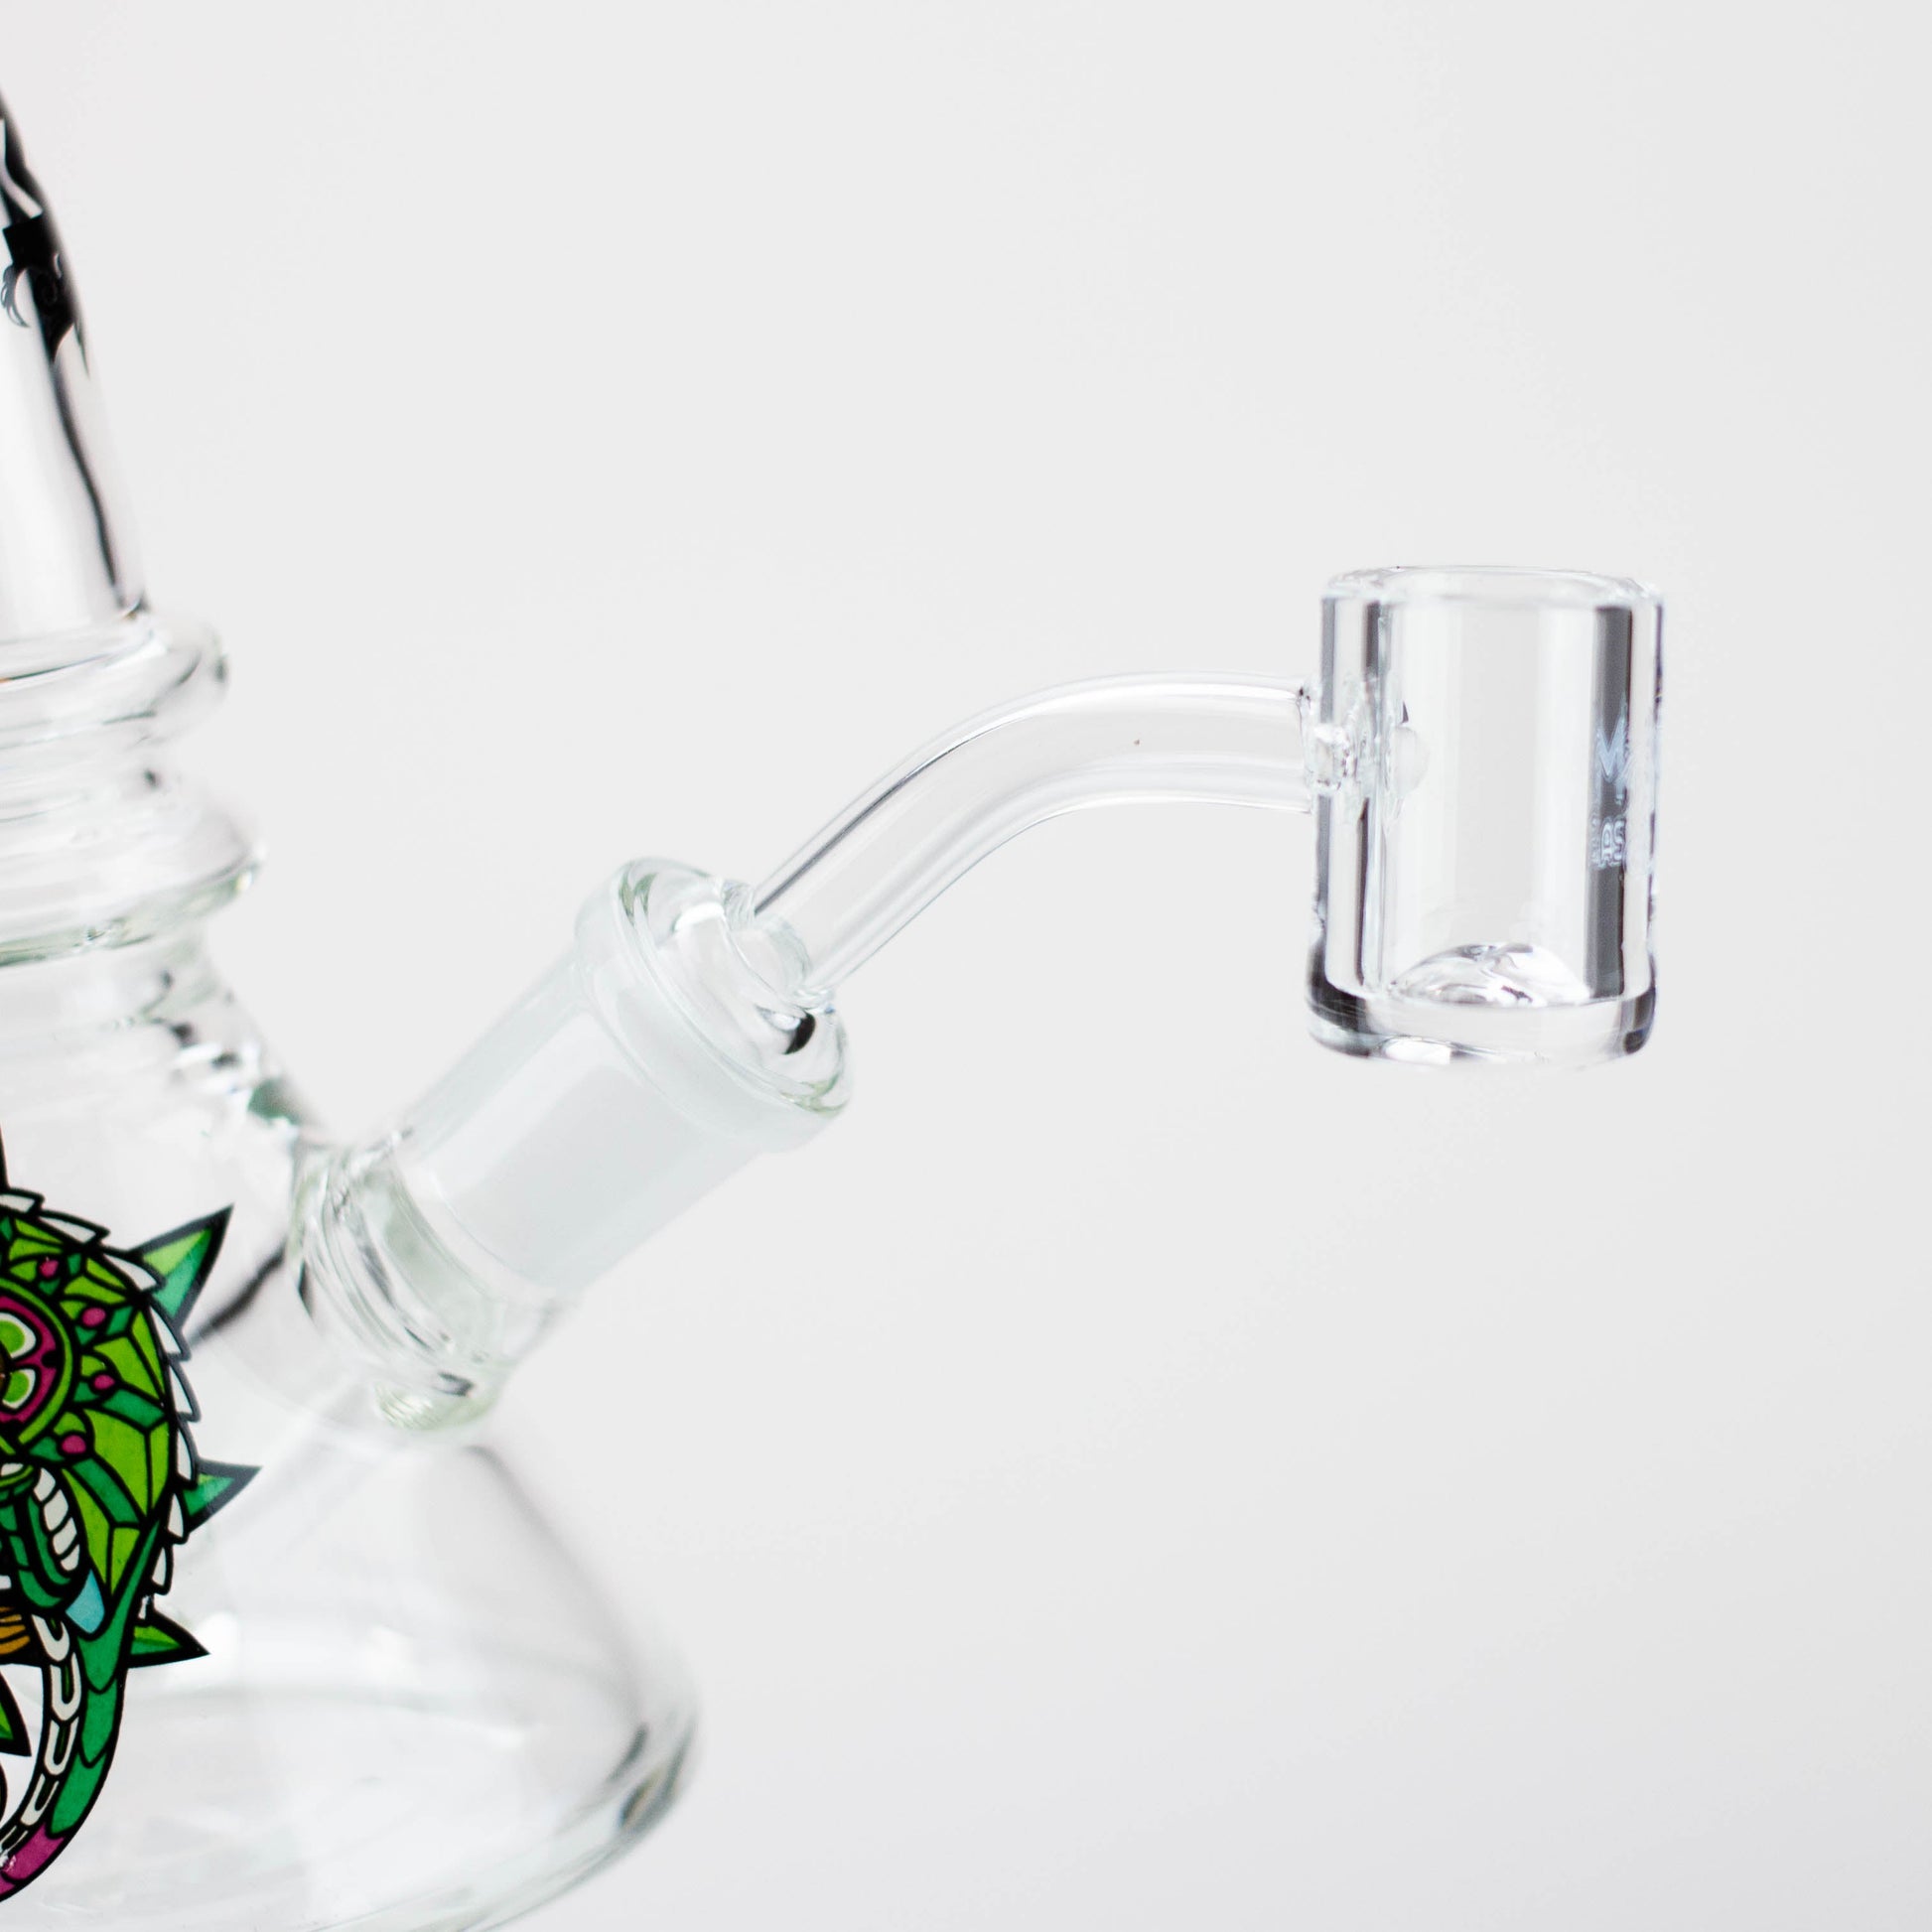 6.3" MGM Glass 2-in-1 bubbler with Graphic [C2671]_1